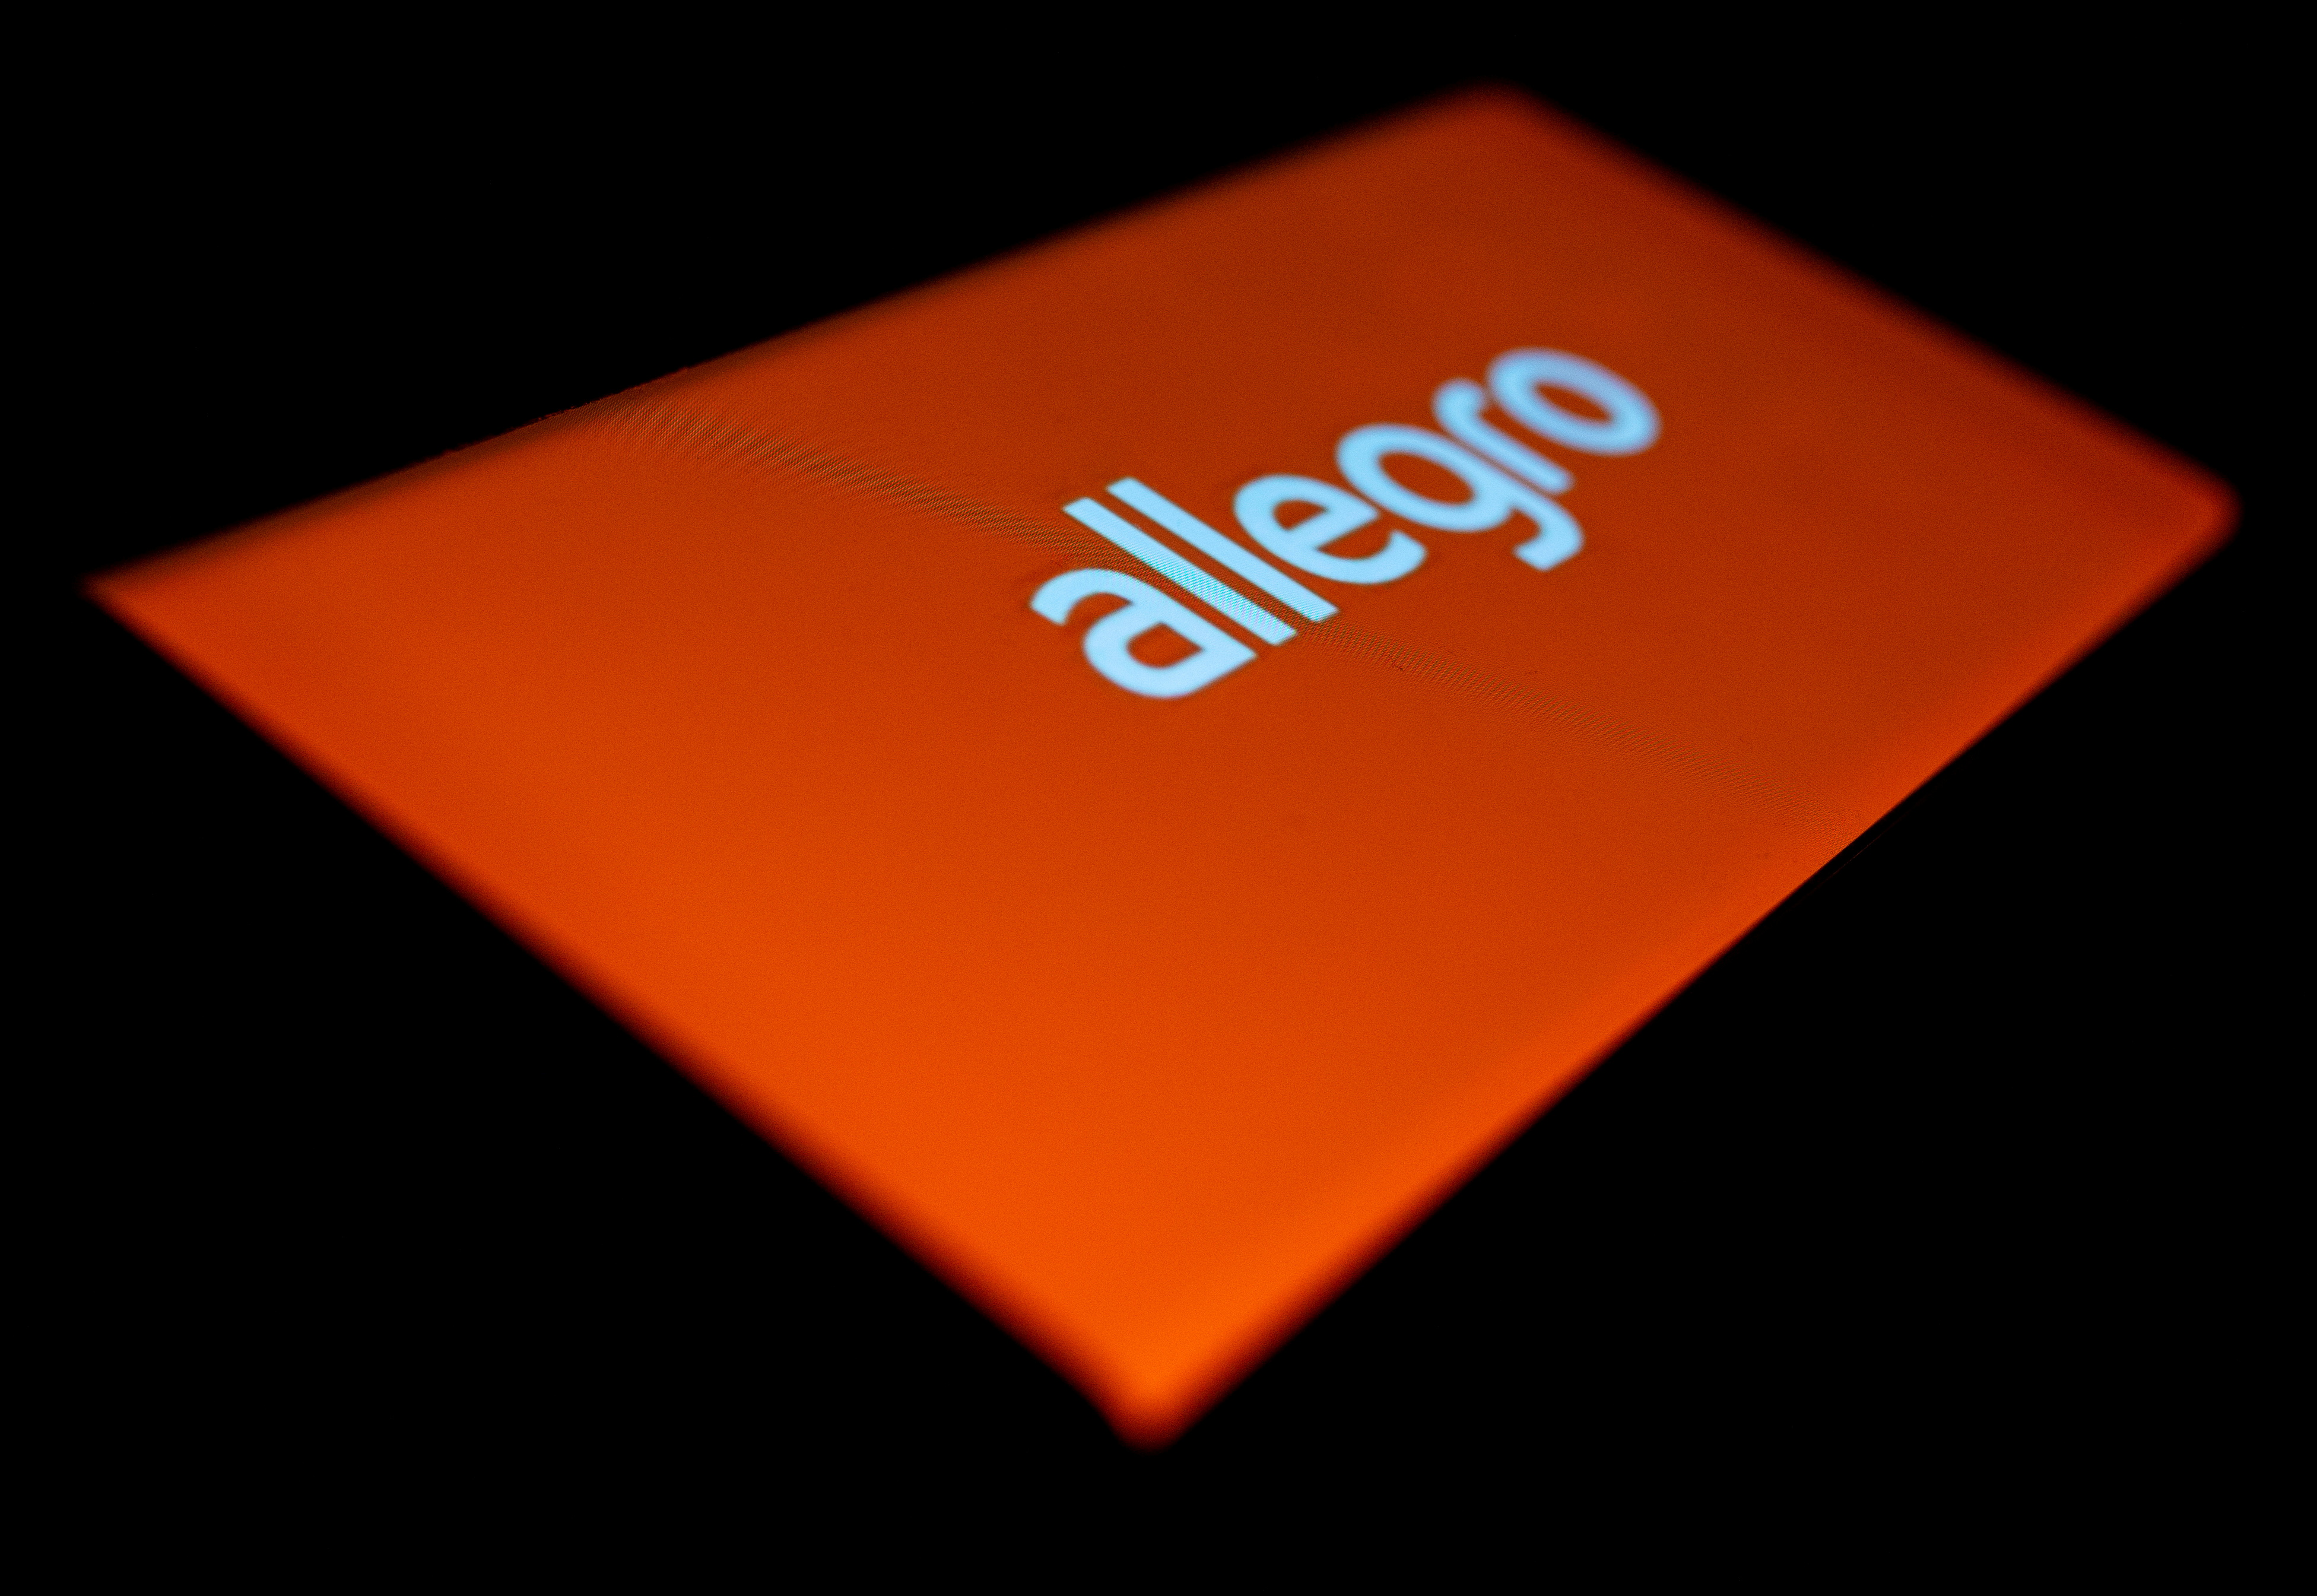 Allegro logo is seen on the smartphone in this illustration